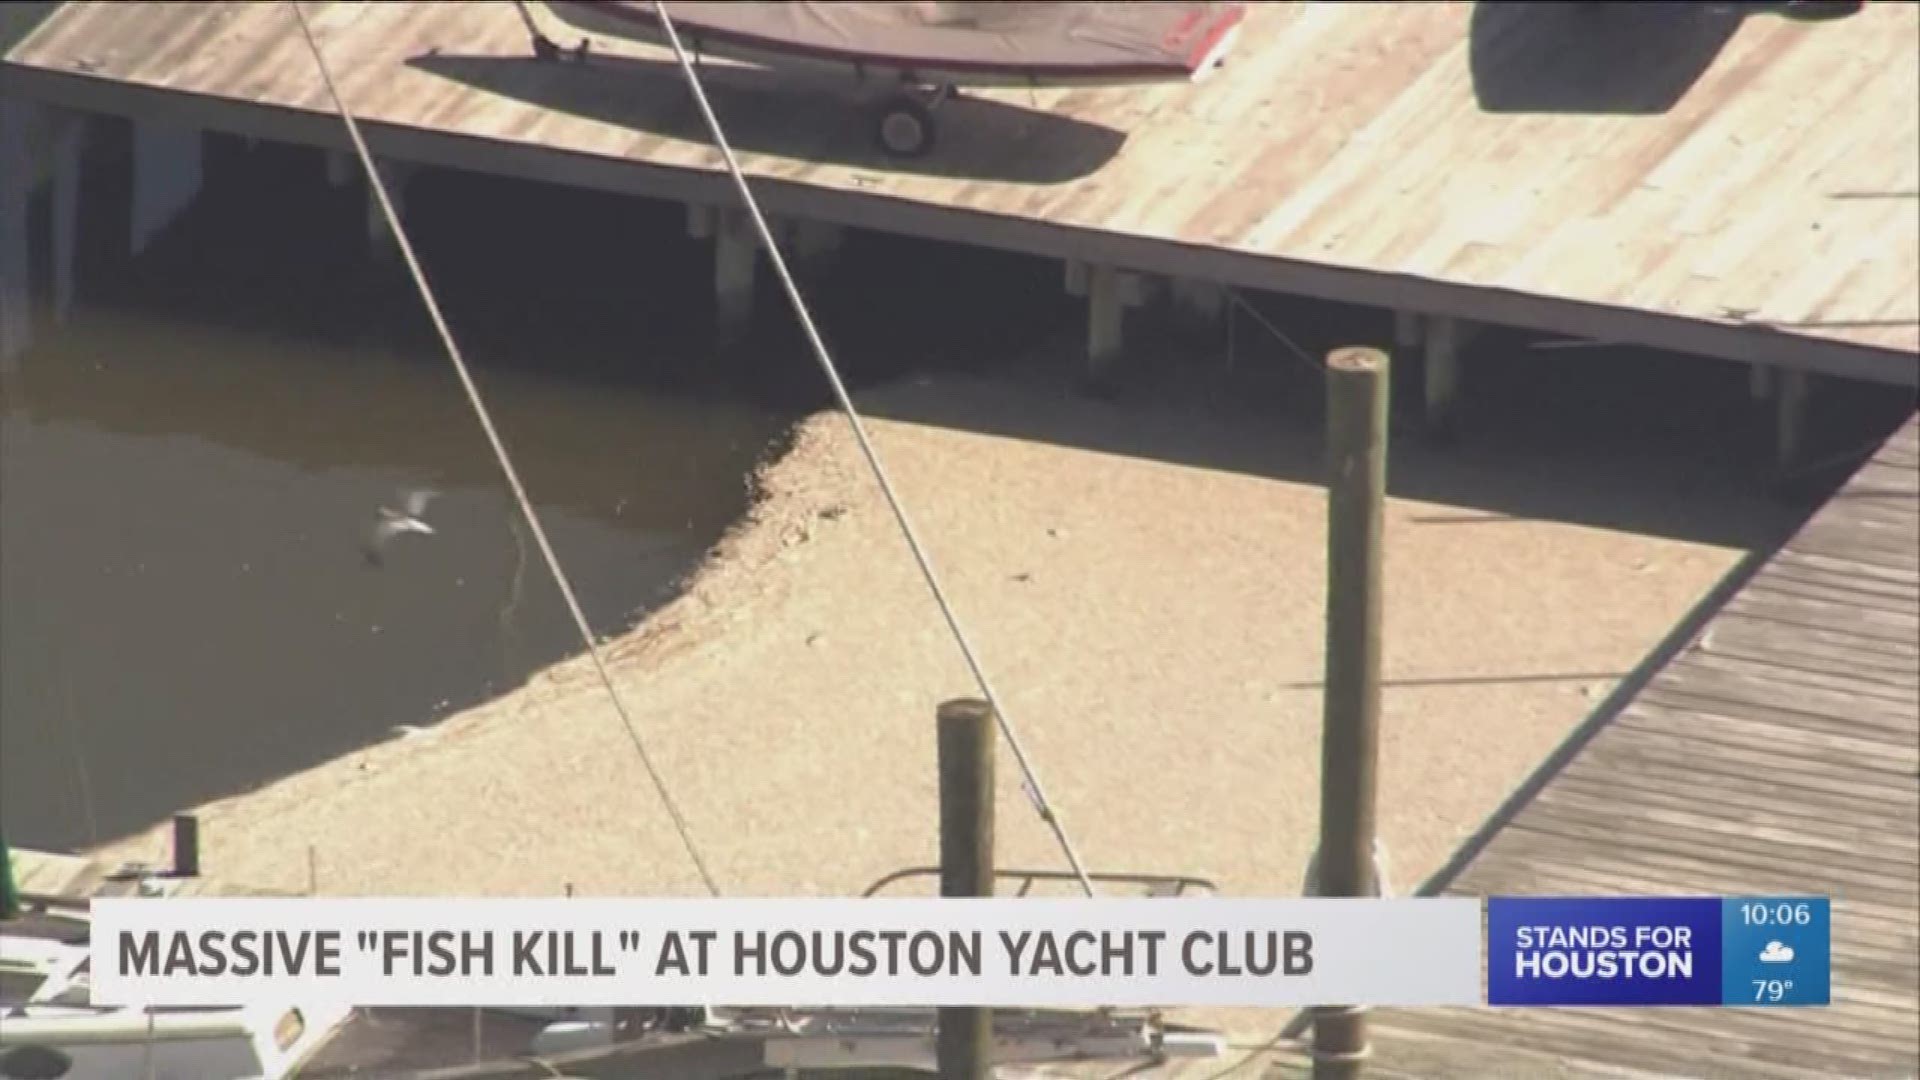 Millions of tiny fish have wound up dead at Houston Yacht Club. Experts say the heat is depleting nutrients and oxygen the fish need, so they're dying.